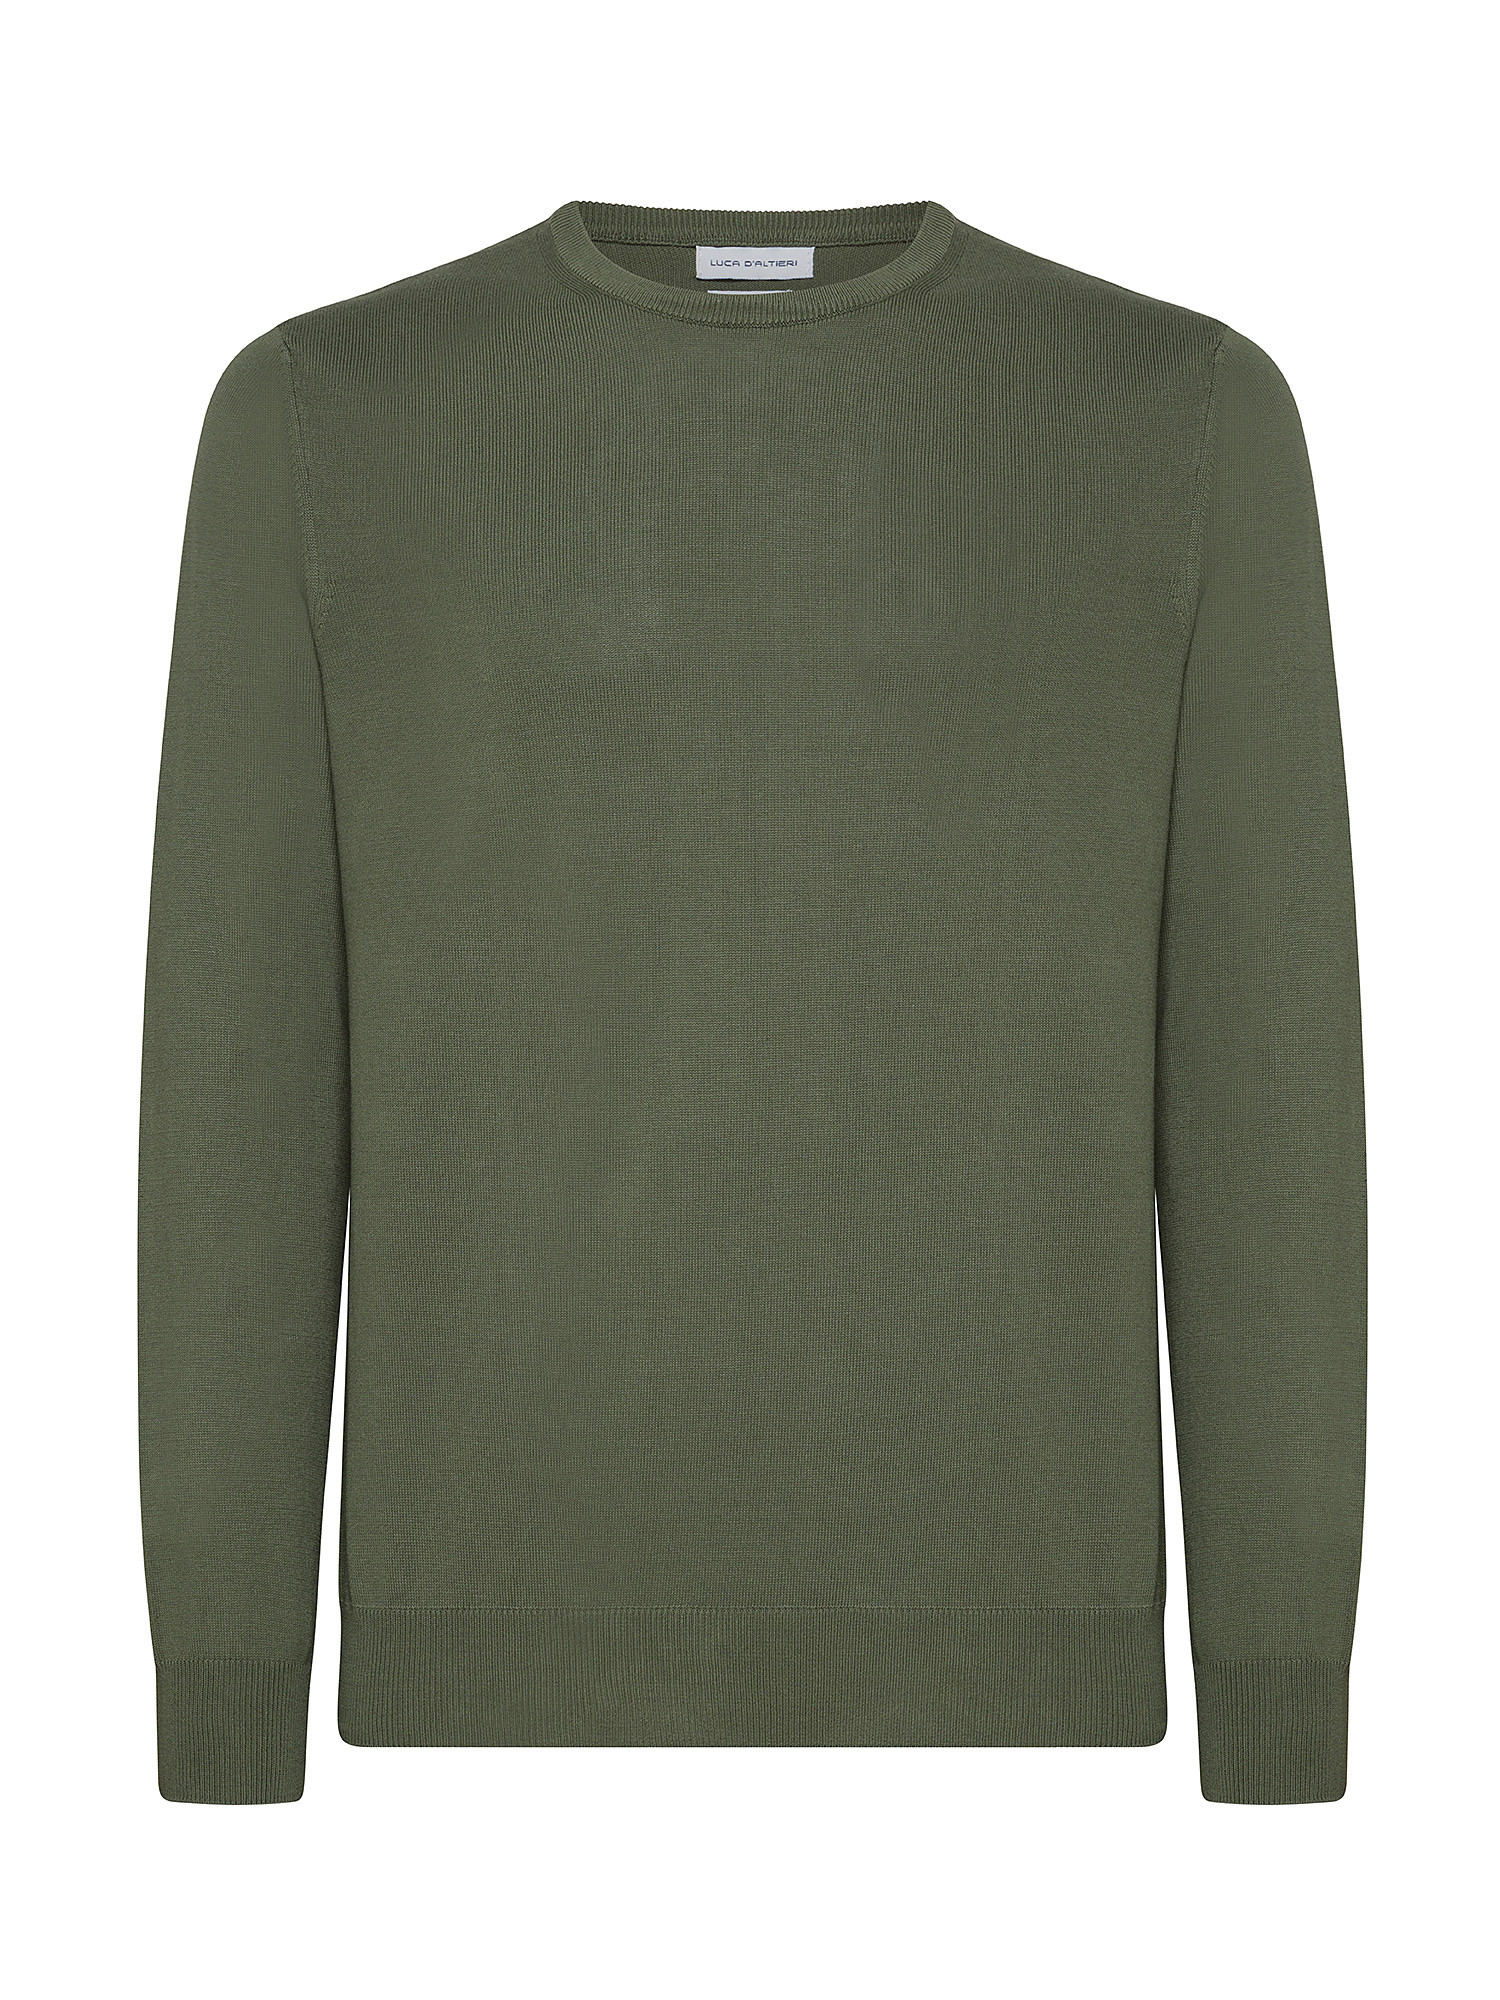 Luca D'Altieri - Crew neck sweater in extrafine pure cotton, Olive Green, large image number 0